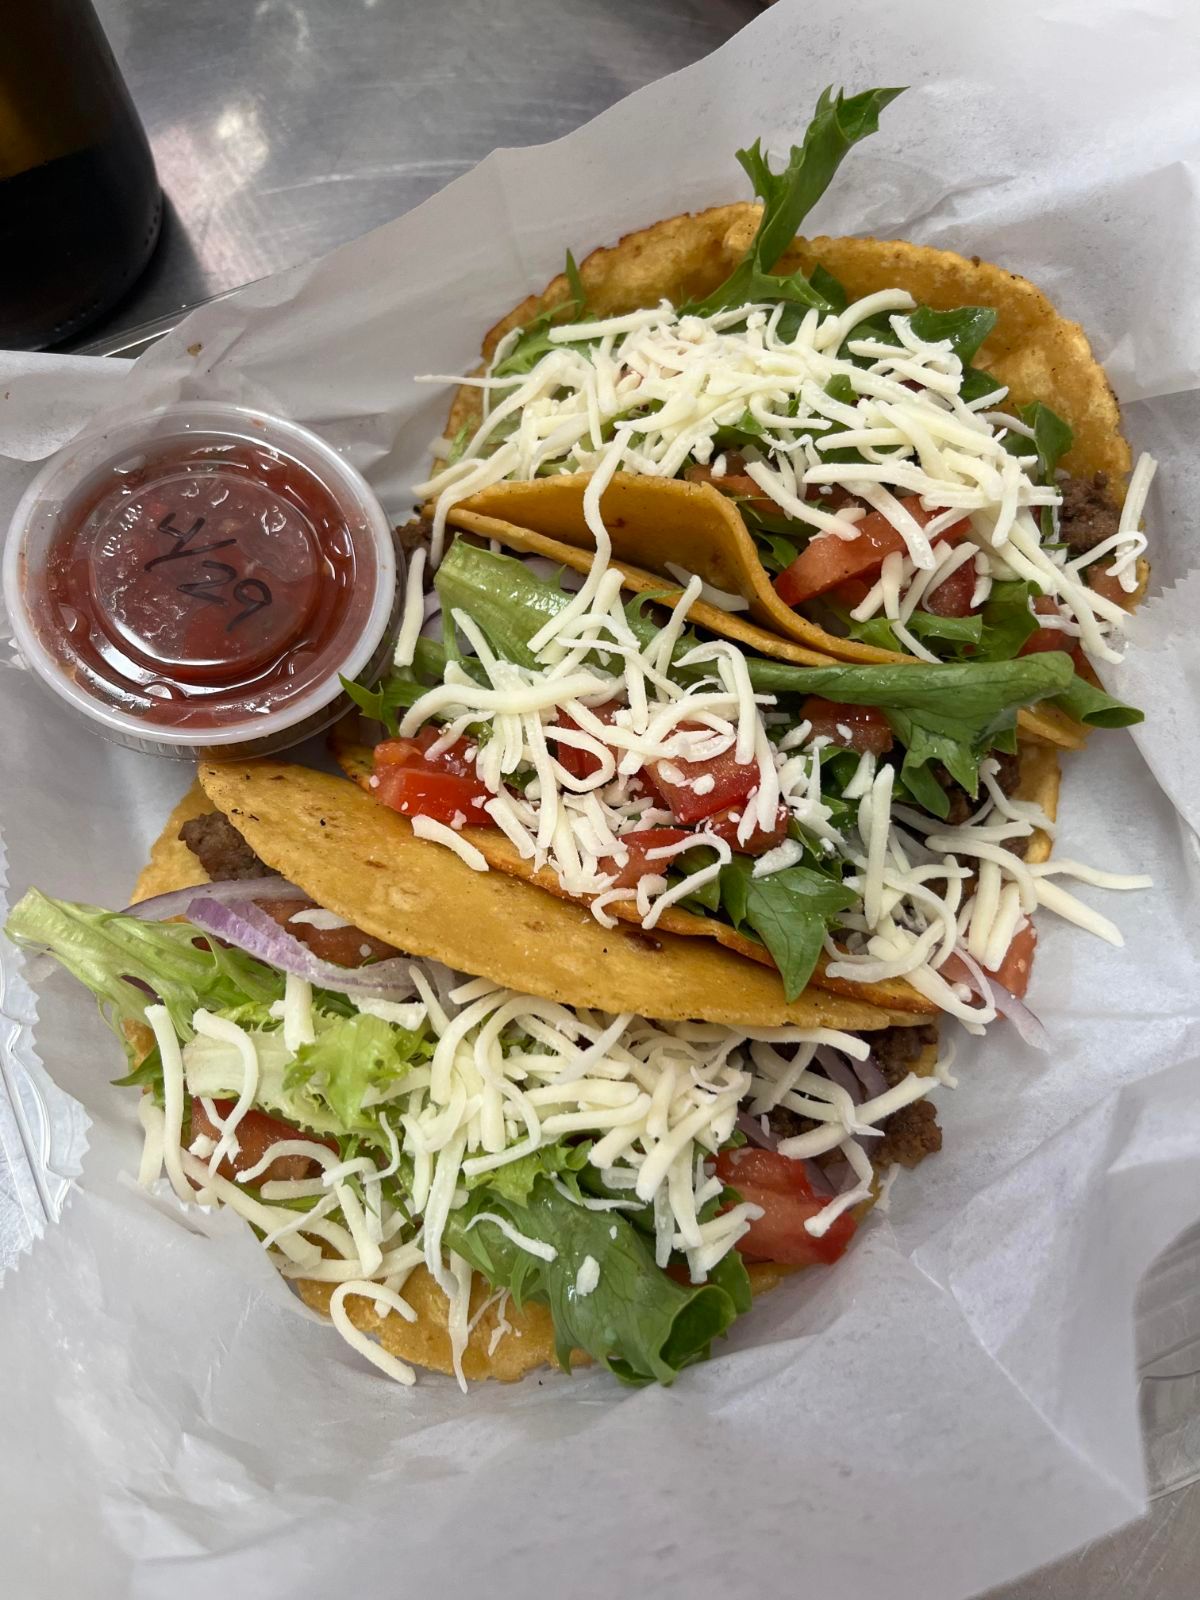 Tacos with lettuce, tomatoes, and cheese